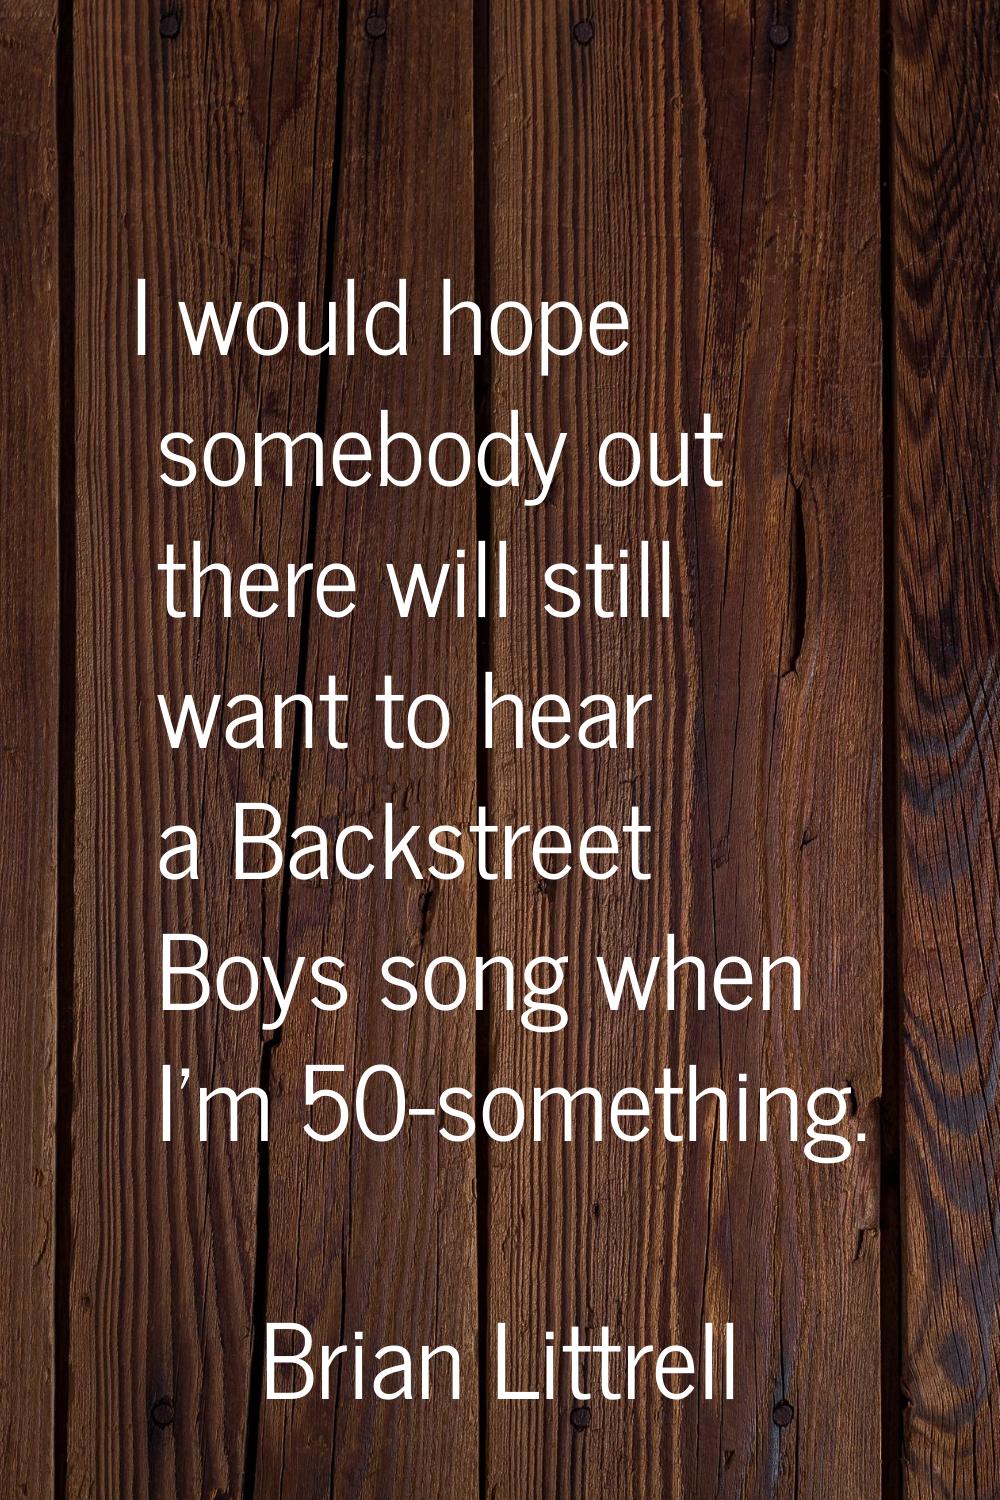 I would hope somebody out there will still want to hear a Backstreet Boys song when I'm 50-somethin